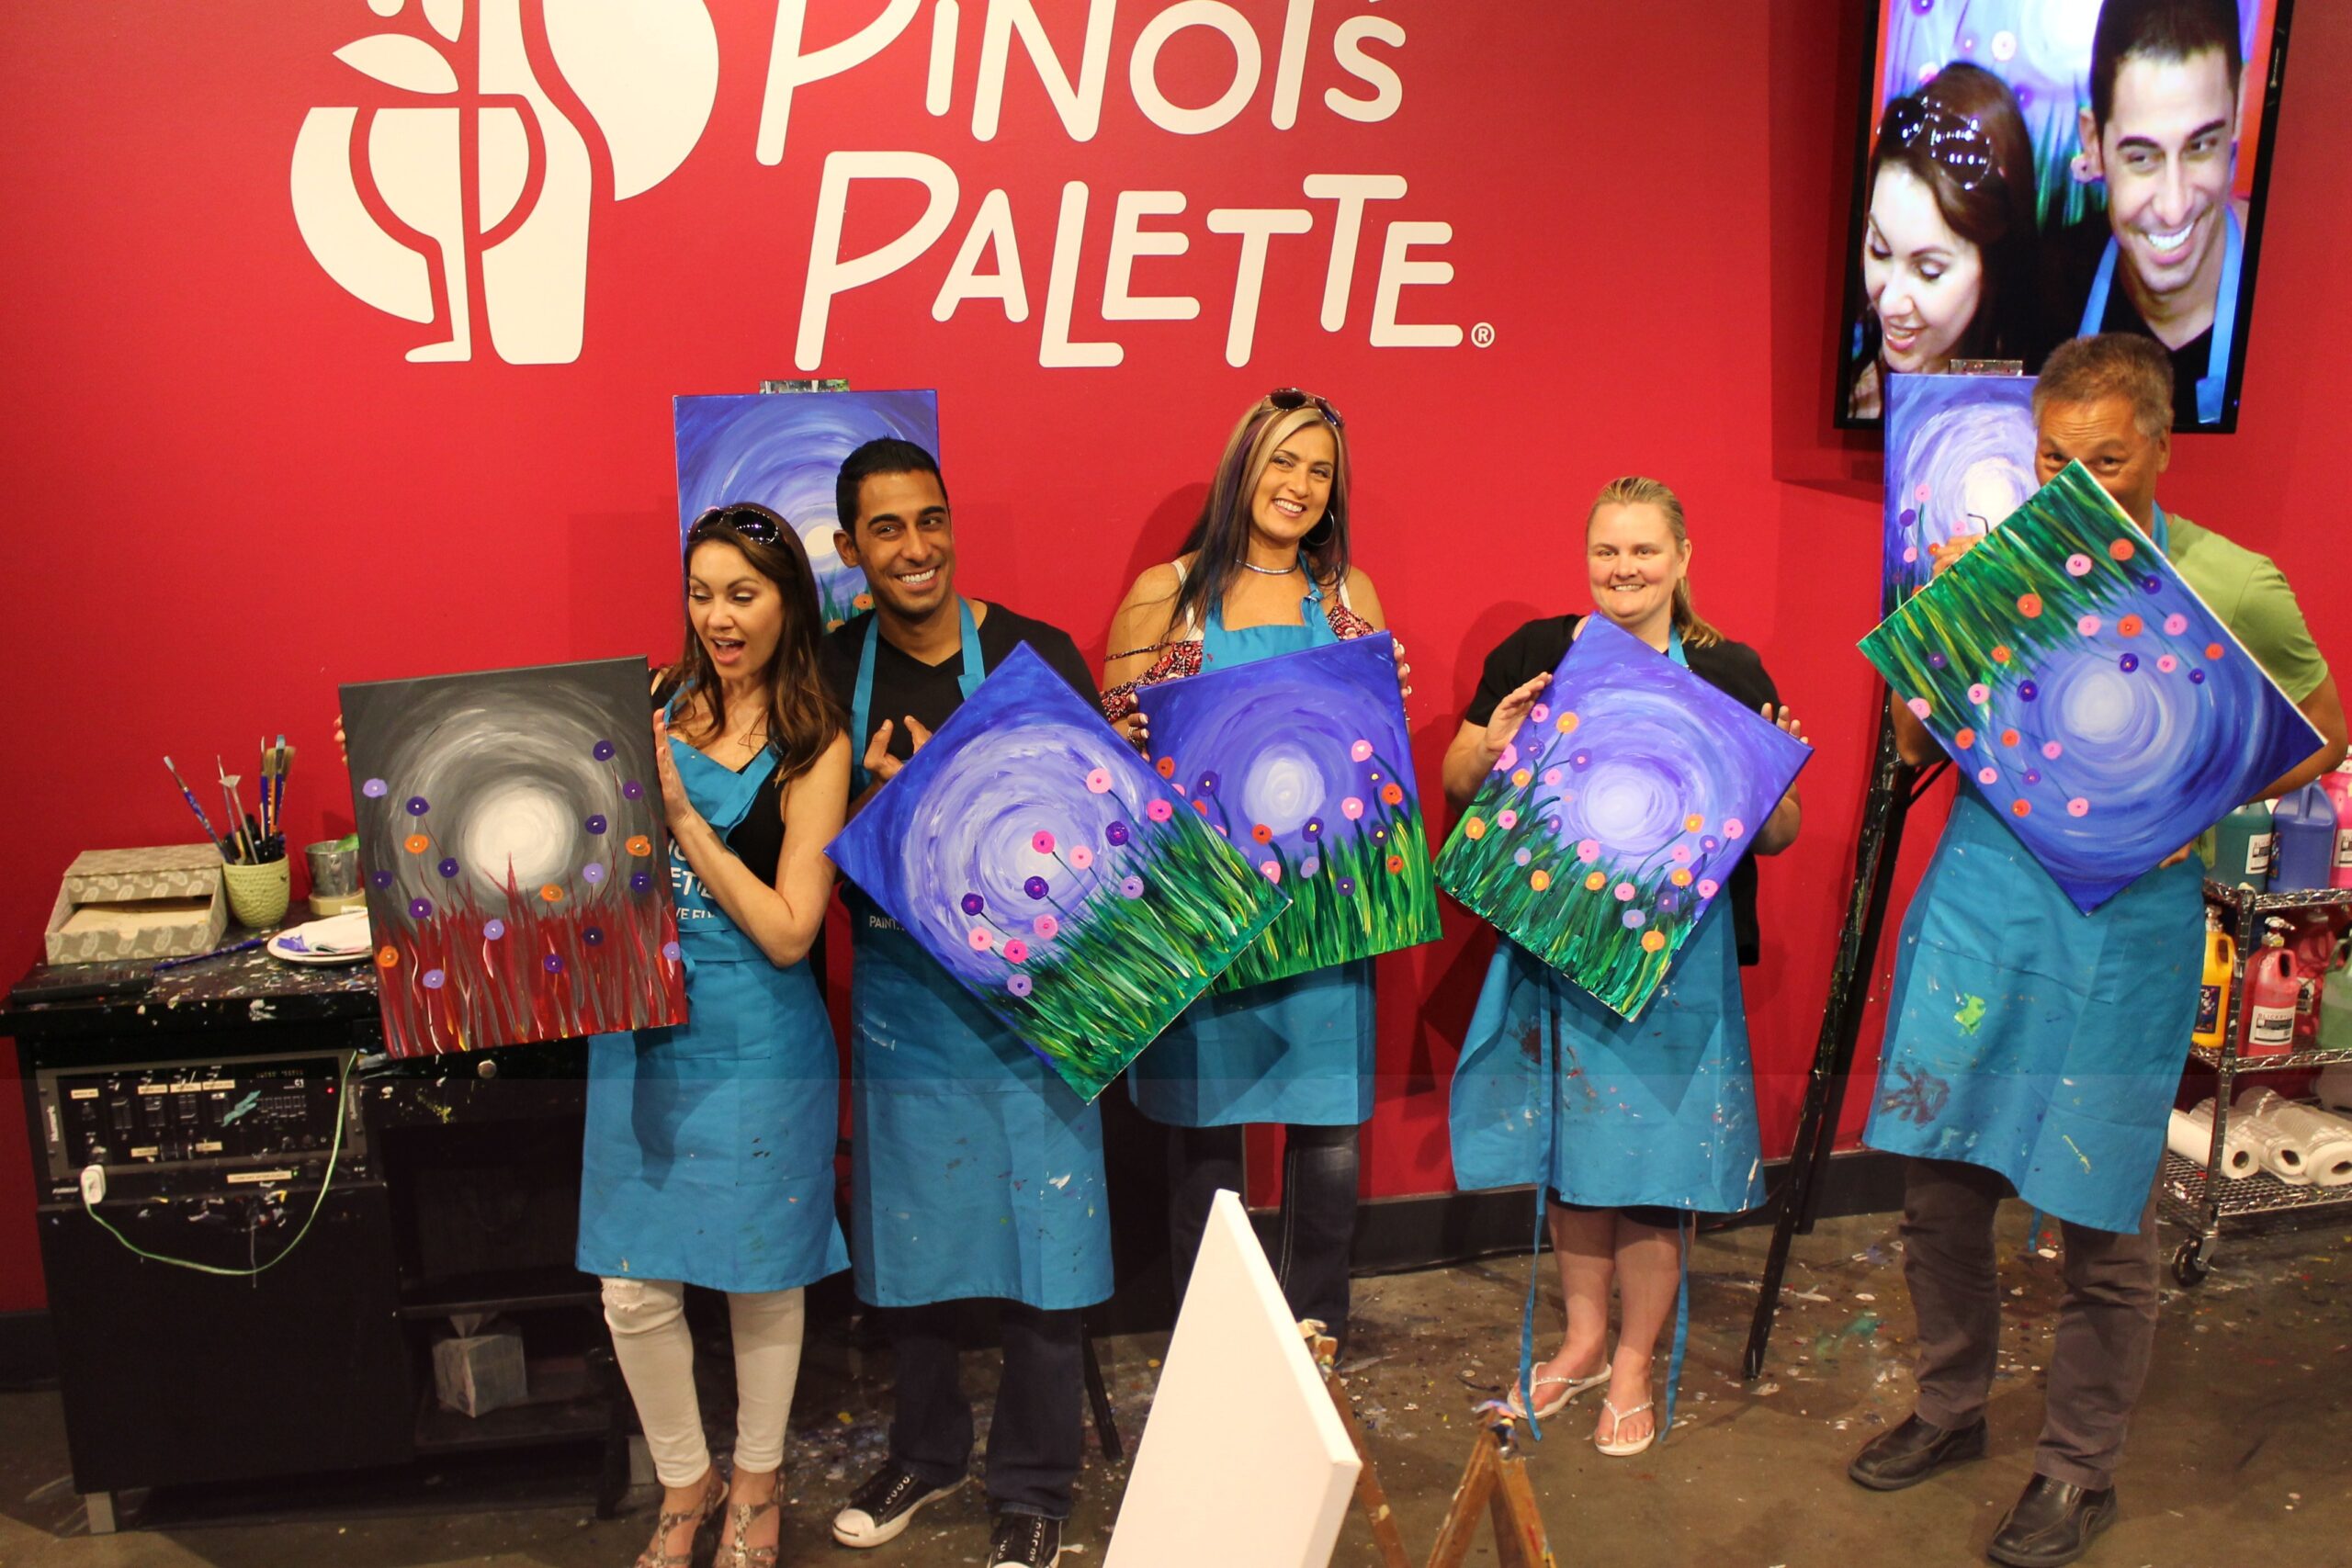 Plan the Perfect Night of Wine & Painting at Pinots Palette